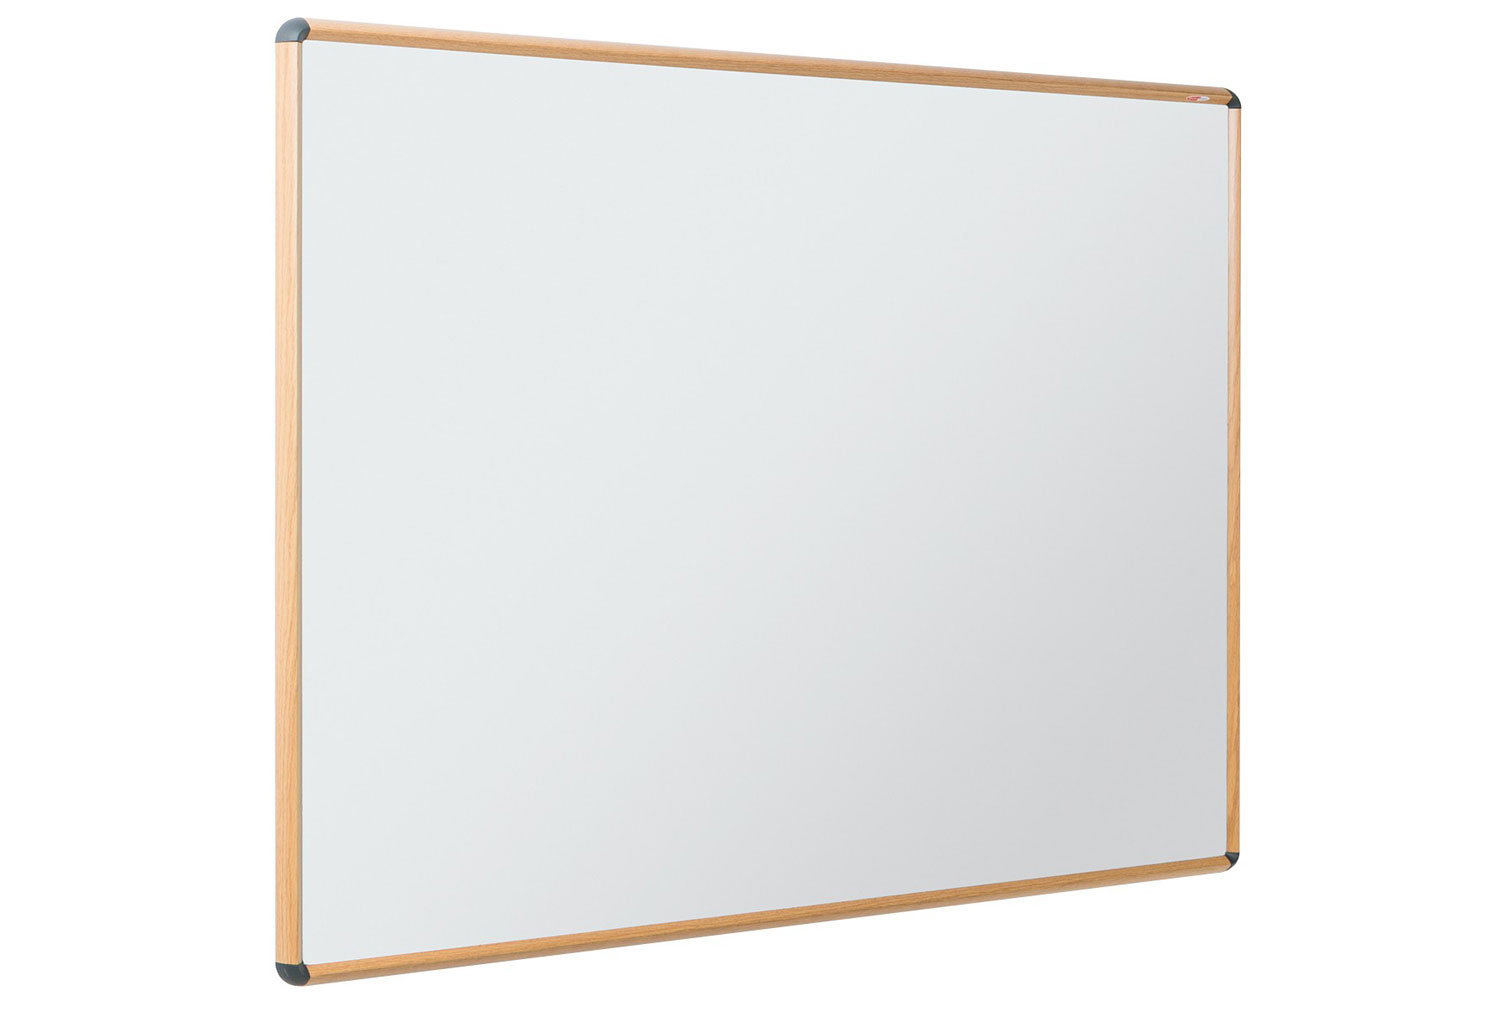 Shield Design Wood Effect Whiteboards, 180wx120h (cm)